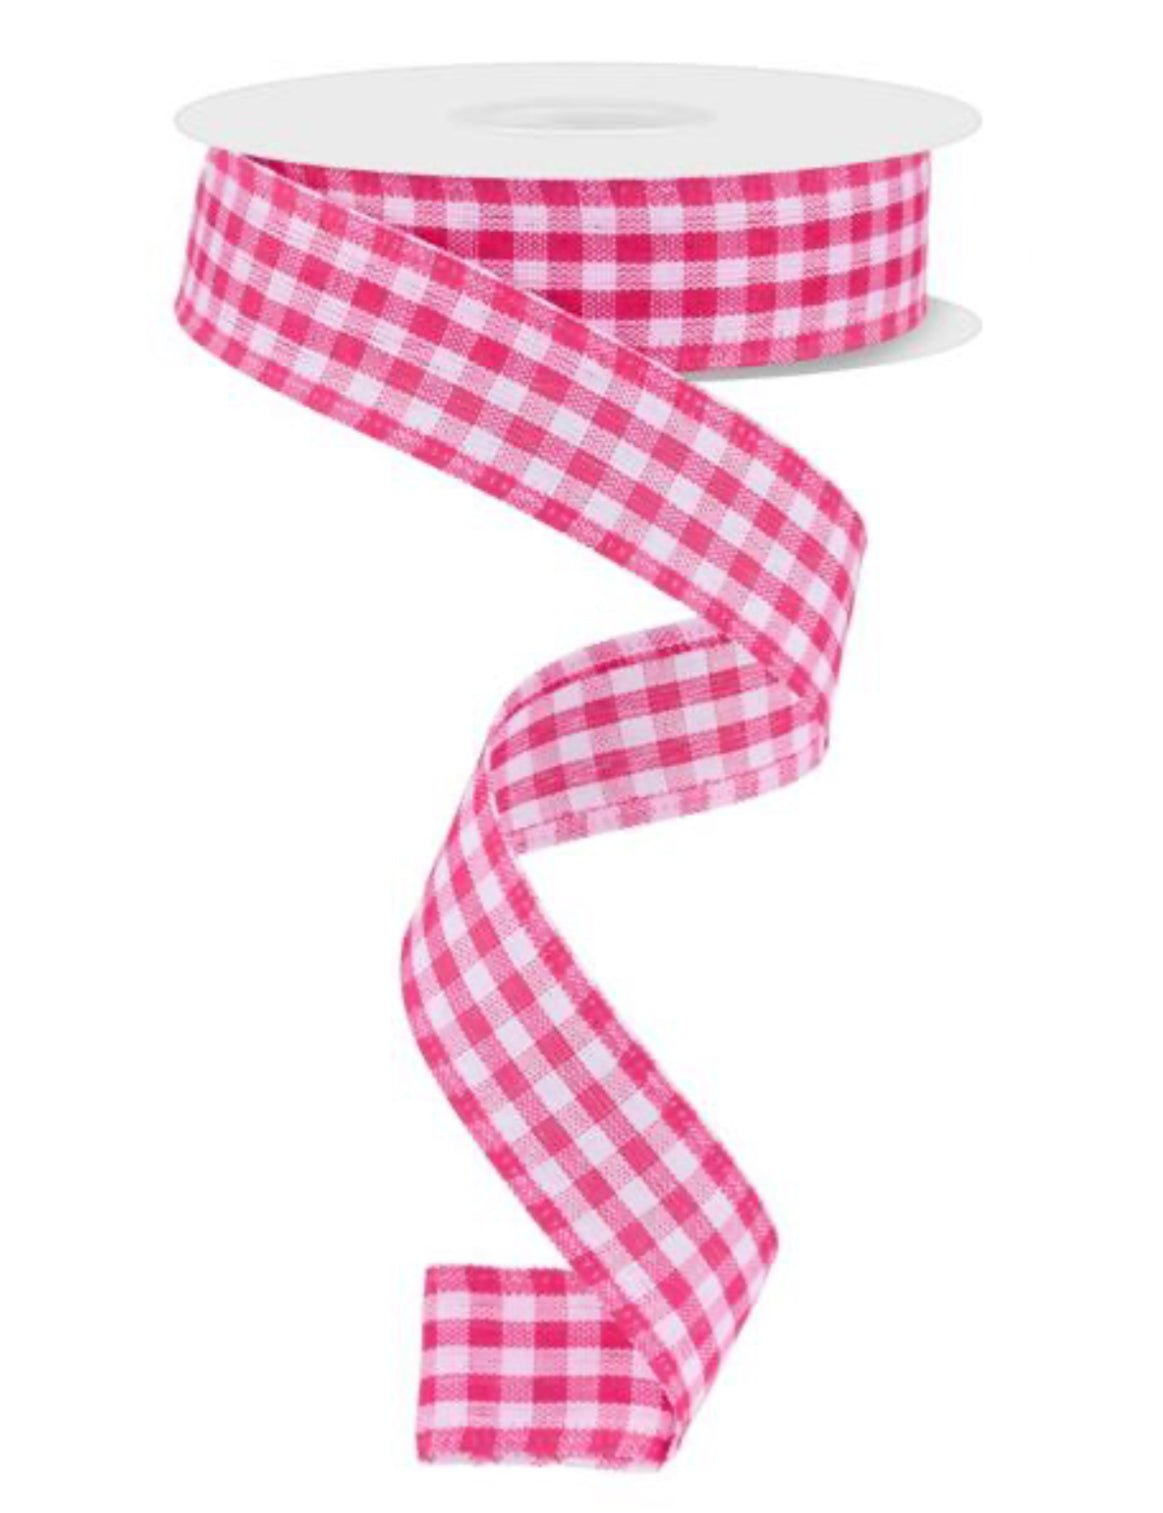 Pink and white classic Gingham wired ribbon, 7/8